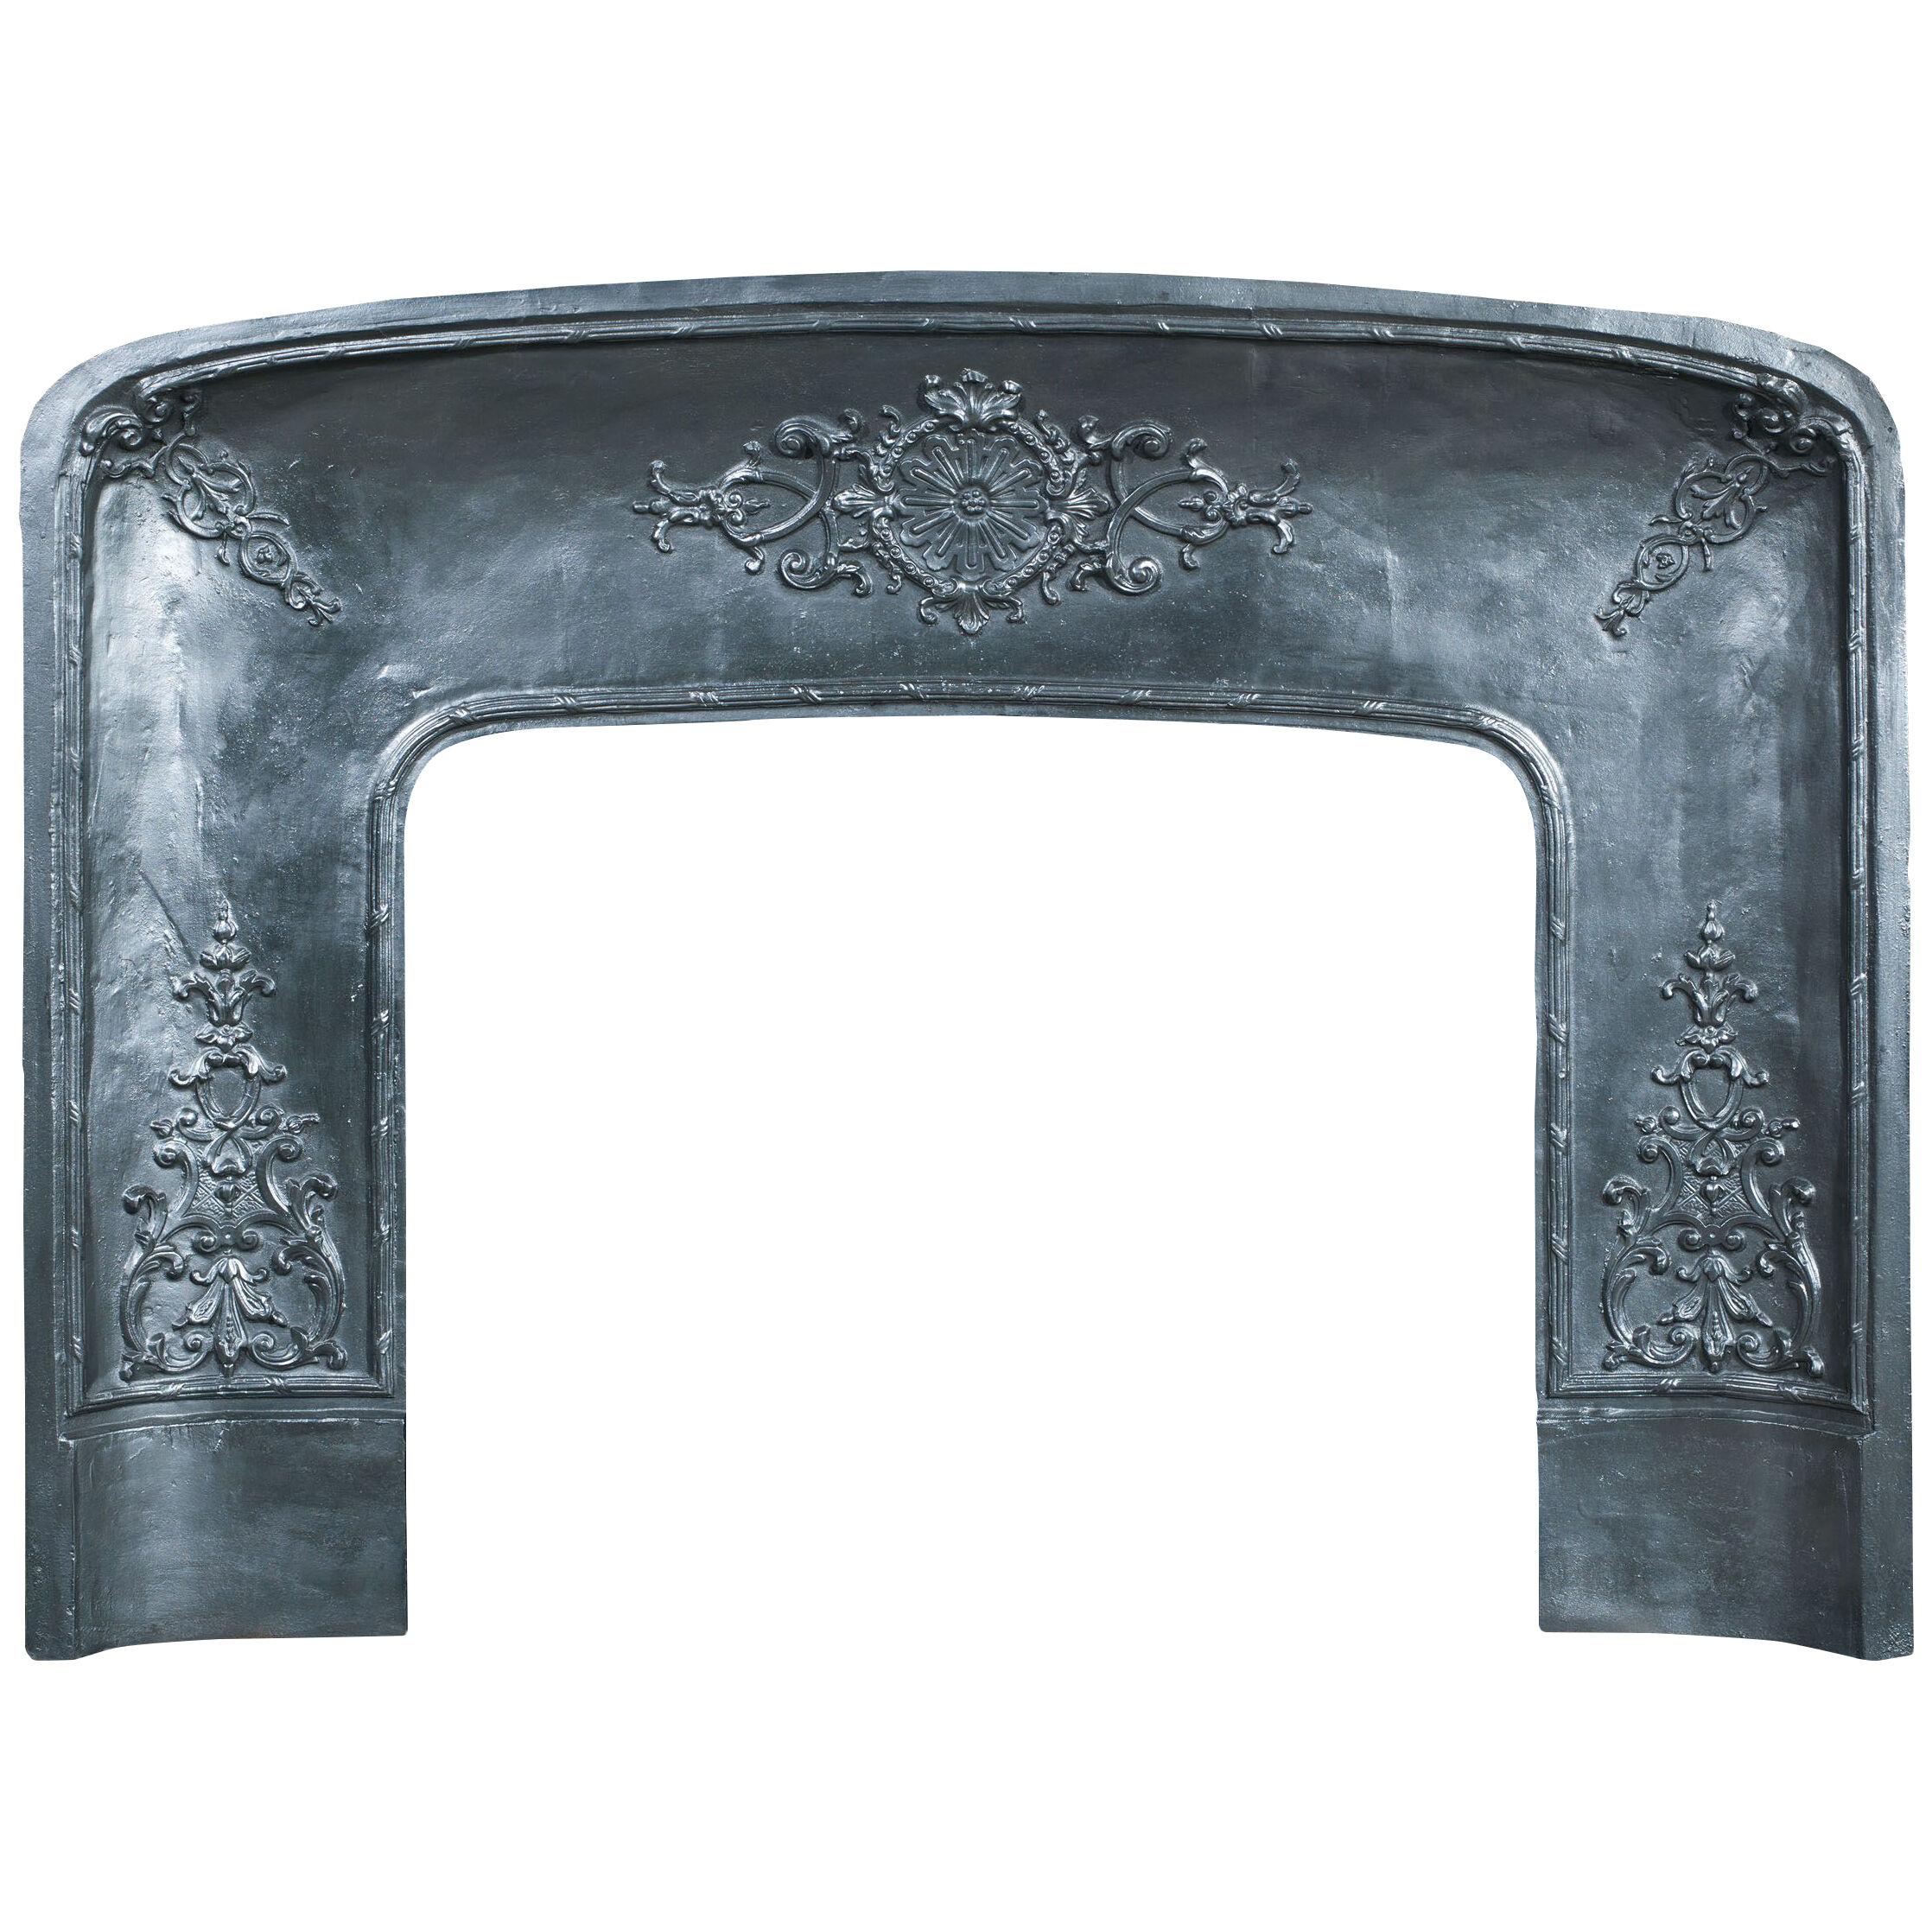 Antique Louis XIV Style Fireplace Insert